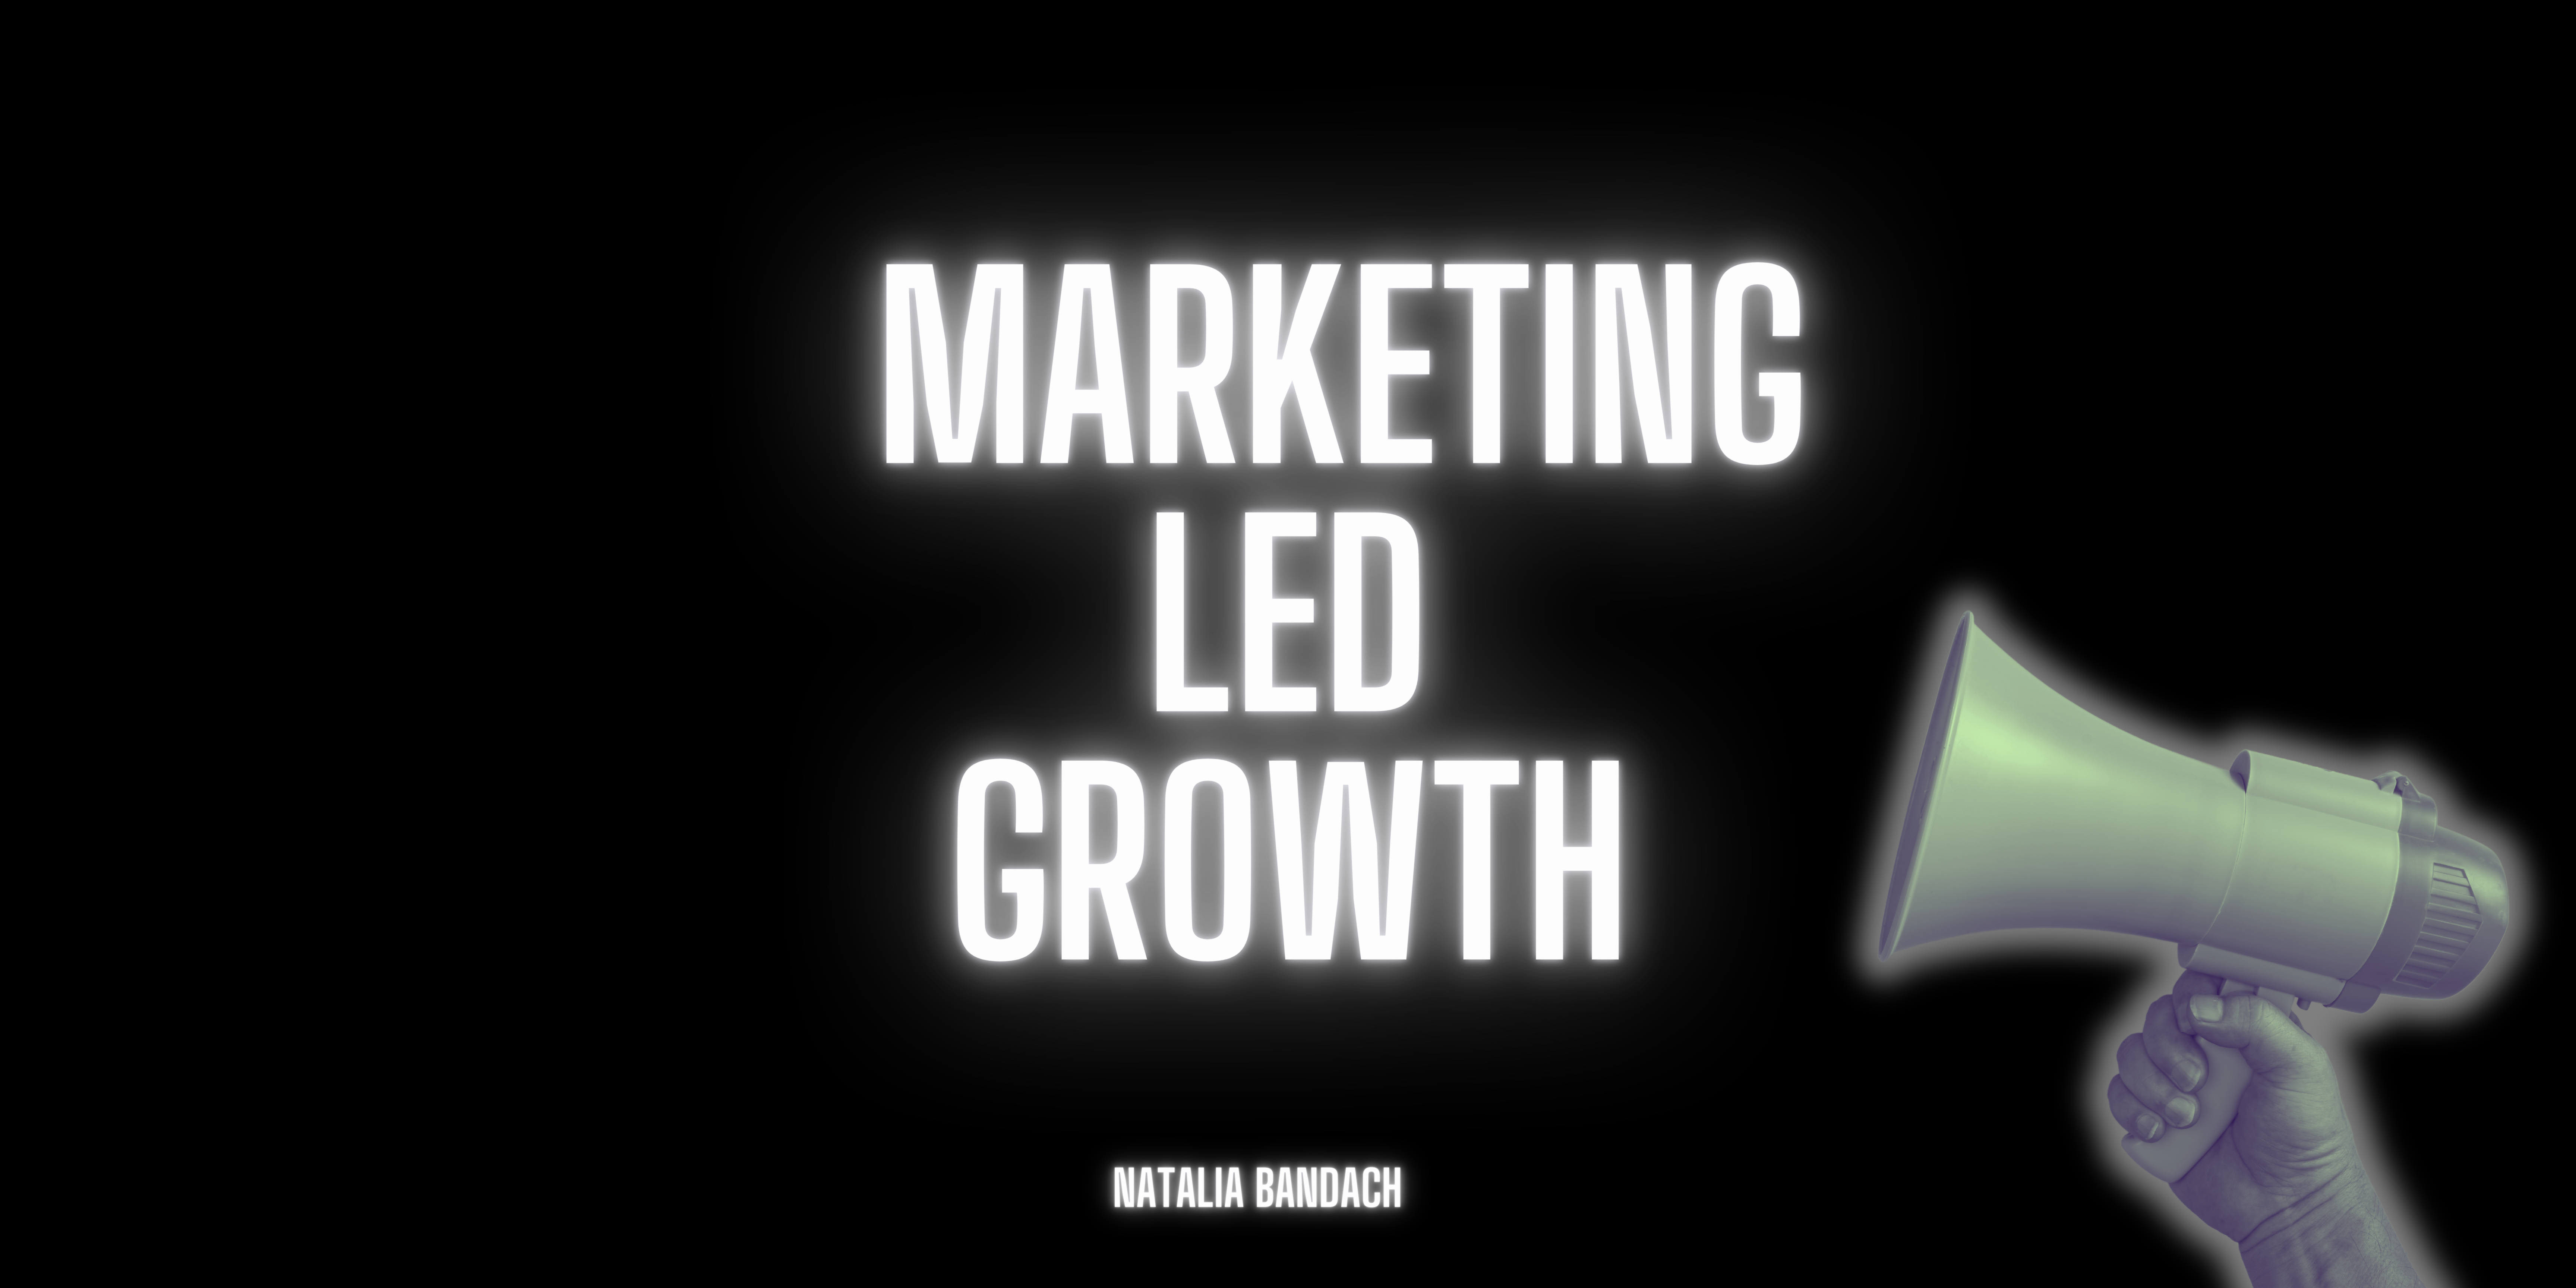 Marketing Led Growth: What is it and how it differs from other growth motions